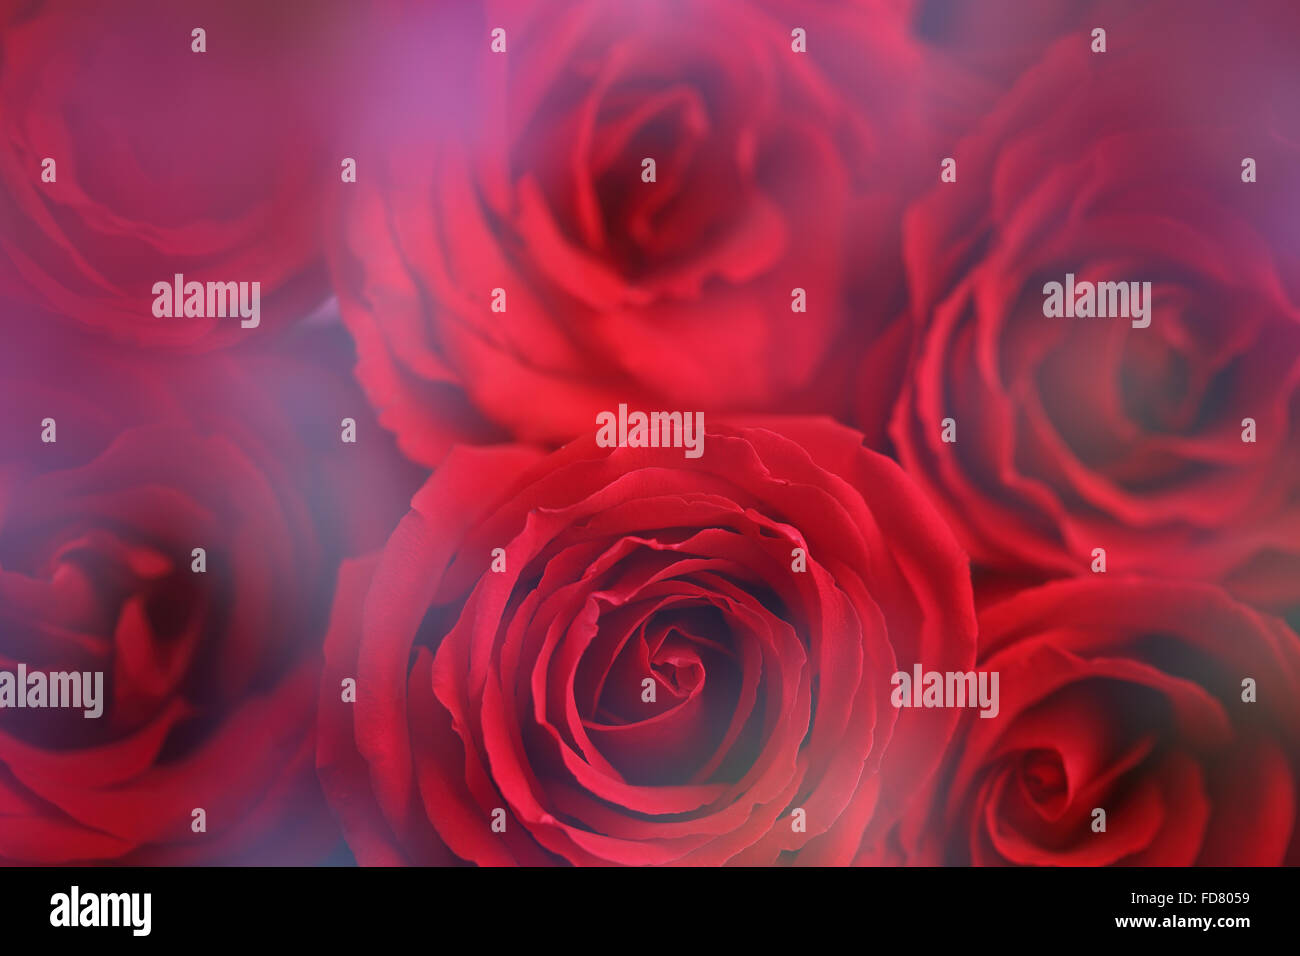 Red Roses background Stock Photo